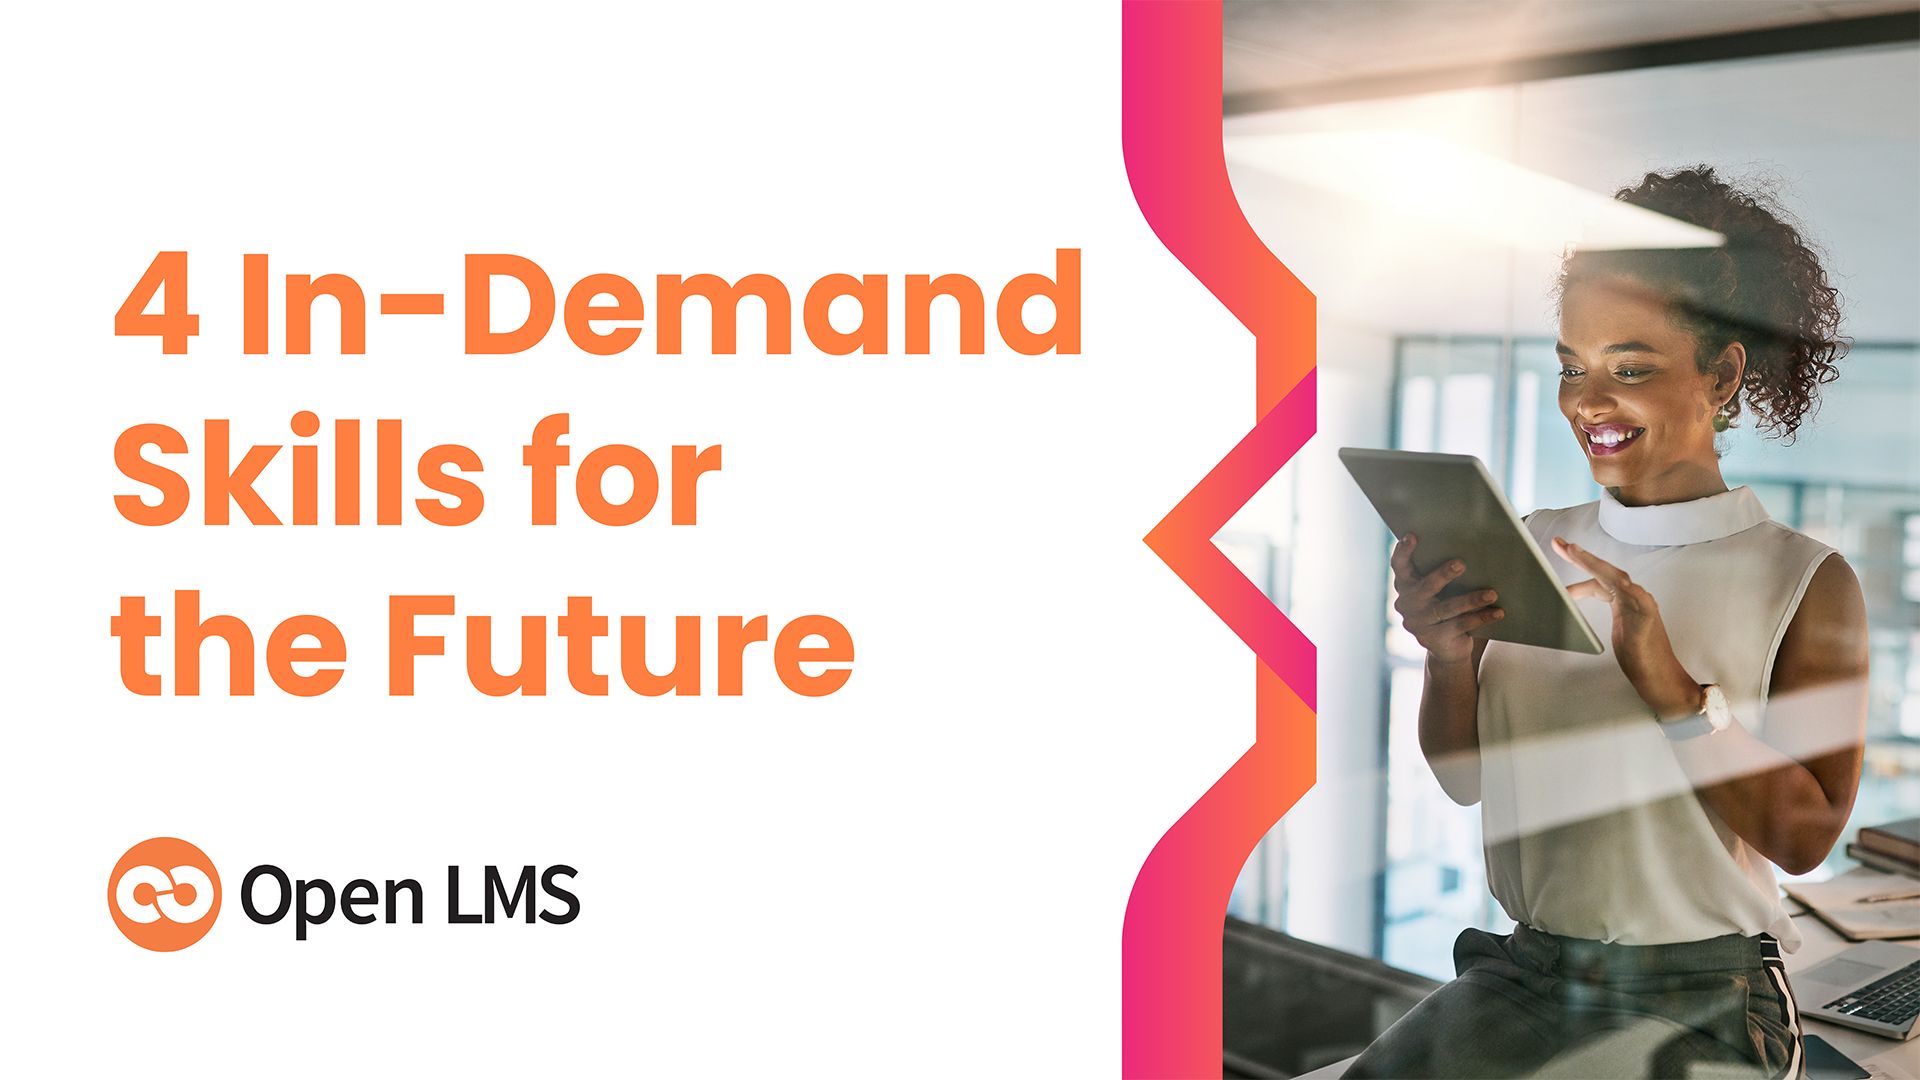 4 In-Demand Skills for the Future and What Learning Institutions Need to Do to Prepare